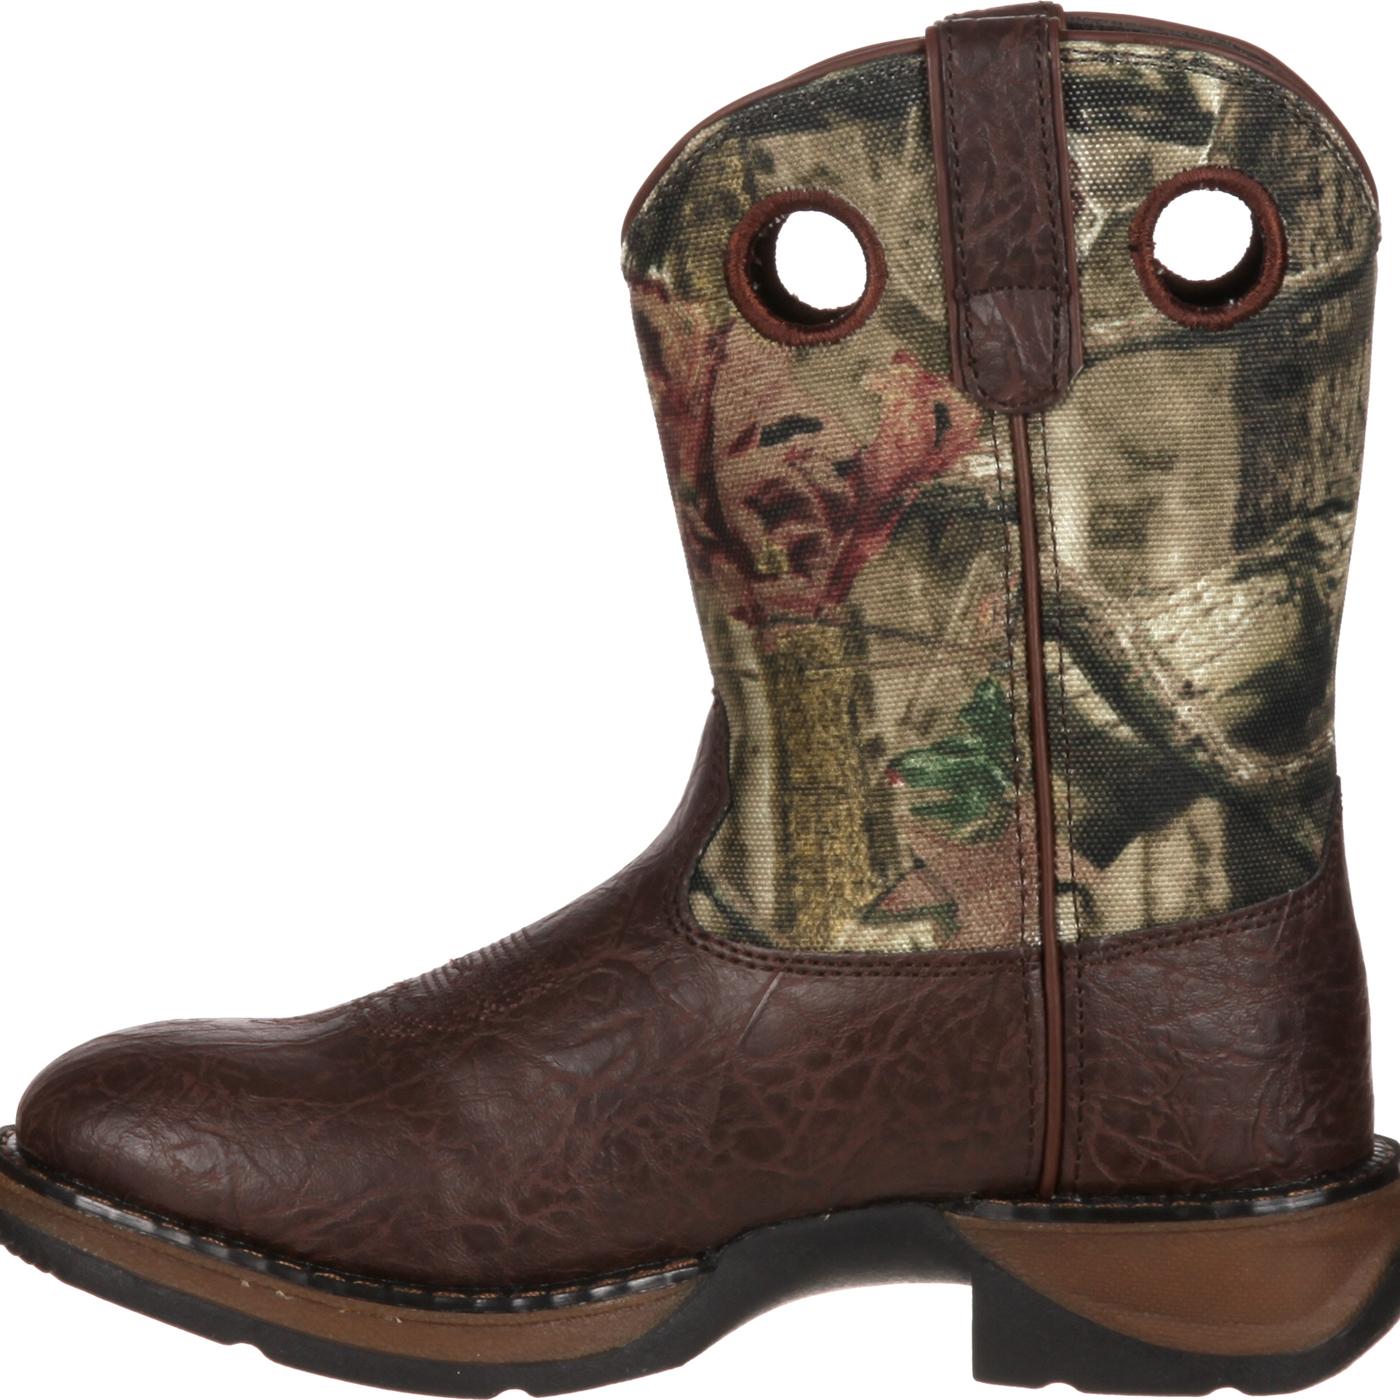 LIL' DURANGO® Little Kid Western Boot Size 10(M) - image 5 of 7